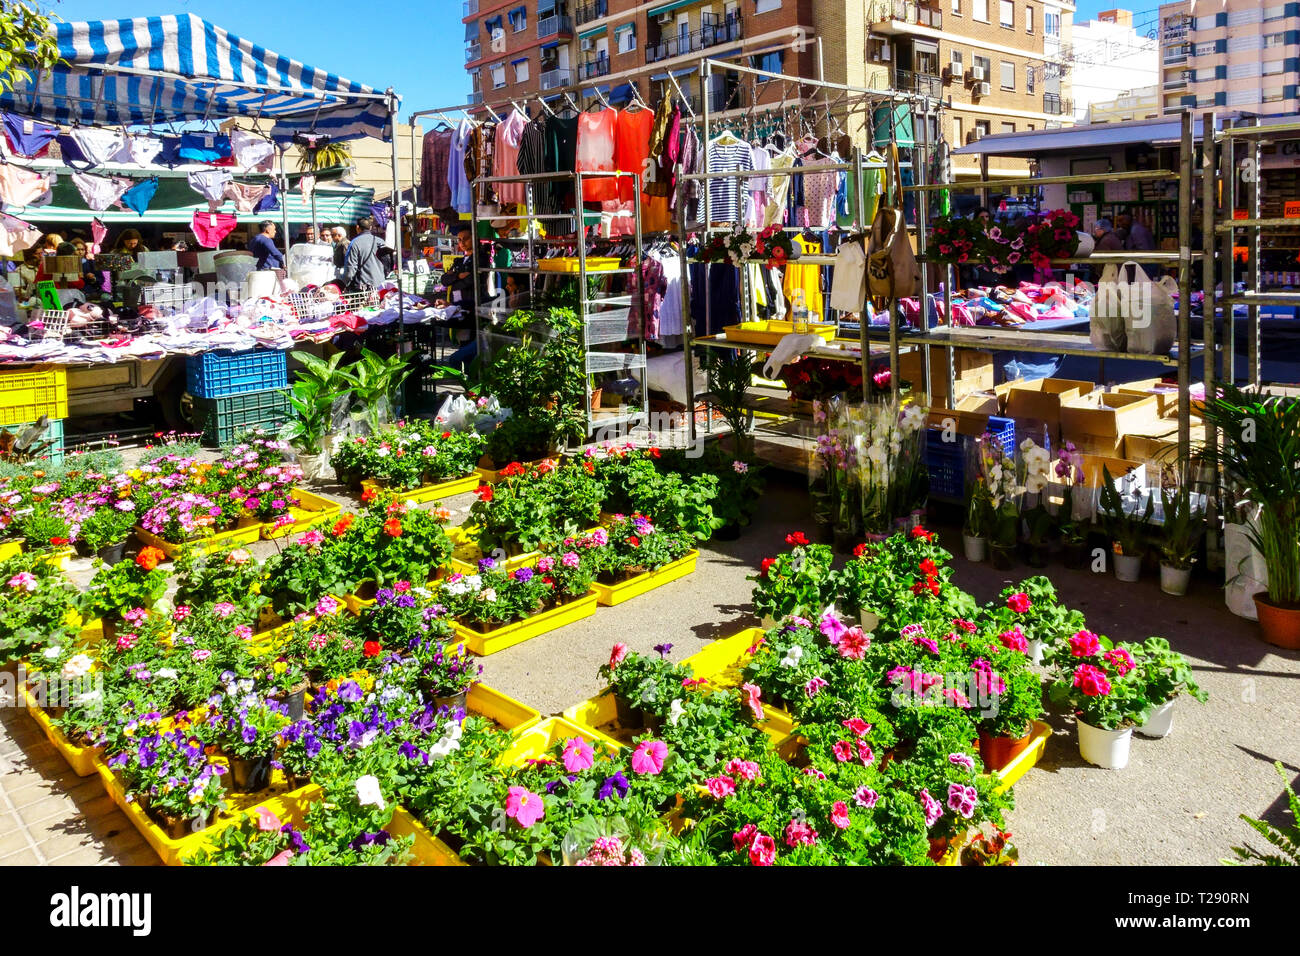 Every Thursday on the streets of El  Cabanyal Canyamelar district is a traditional market, Valencia Spain Flowers outdoor weekly market Stock Photo